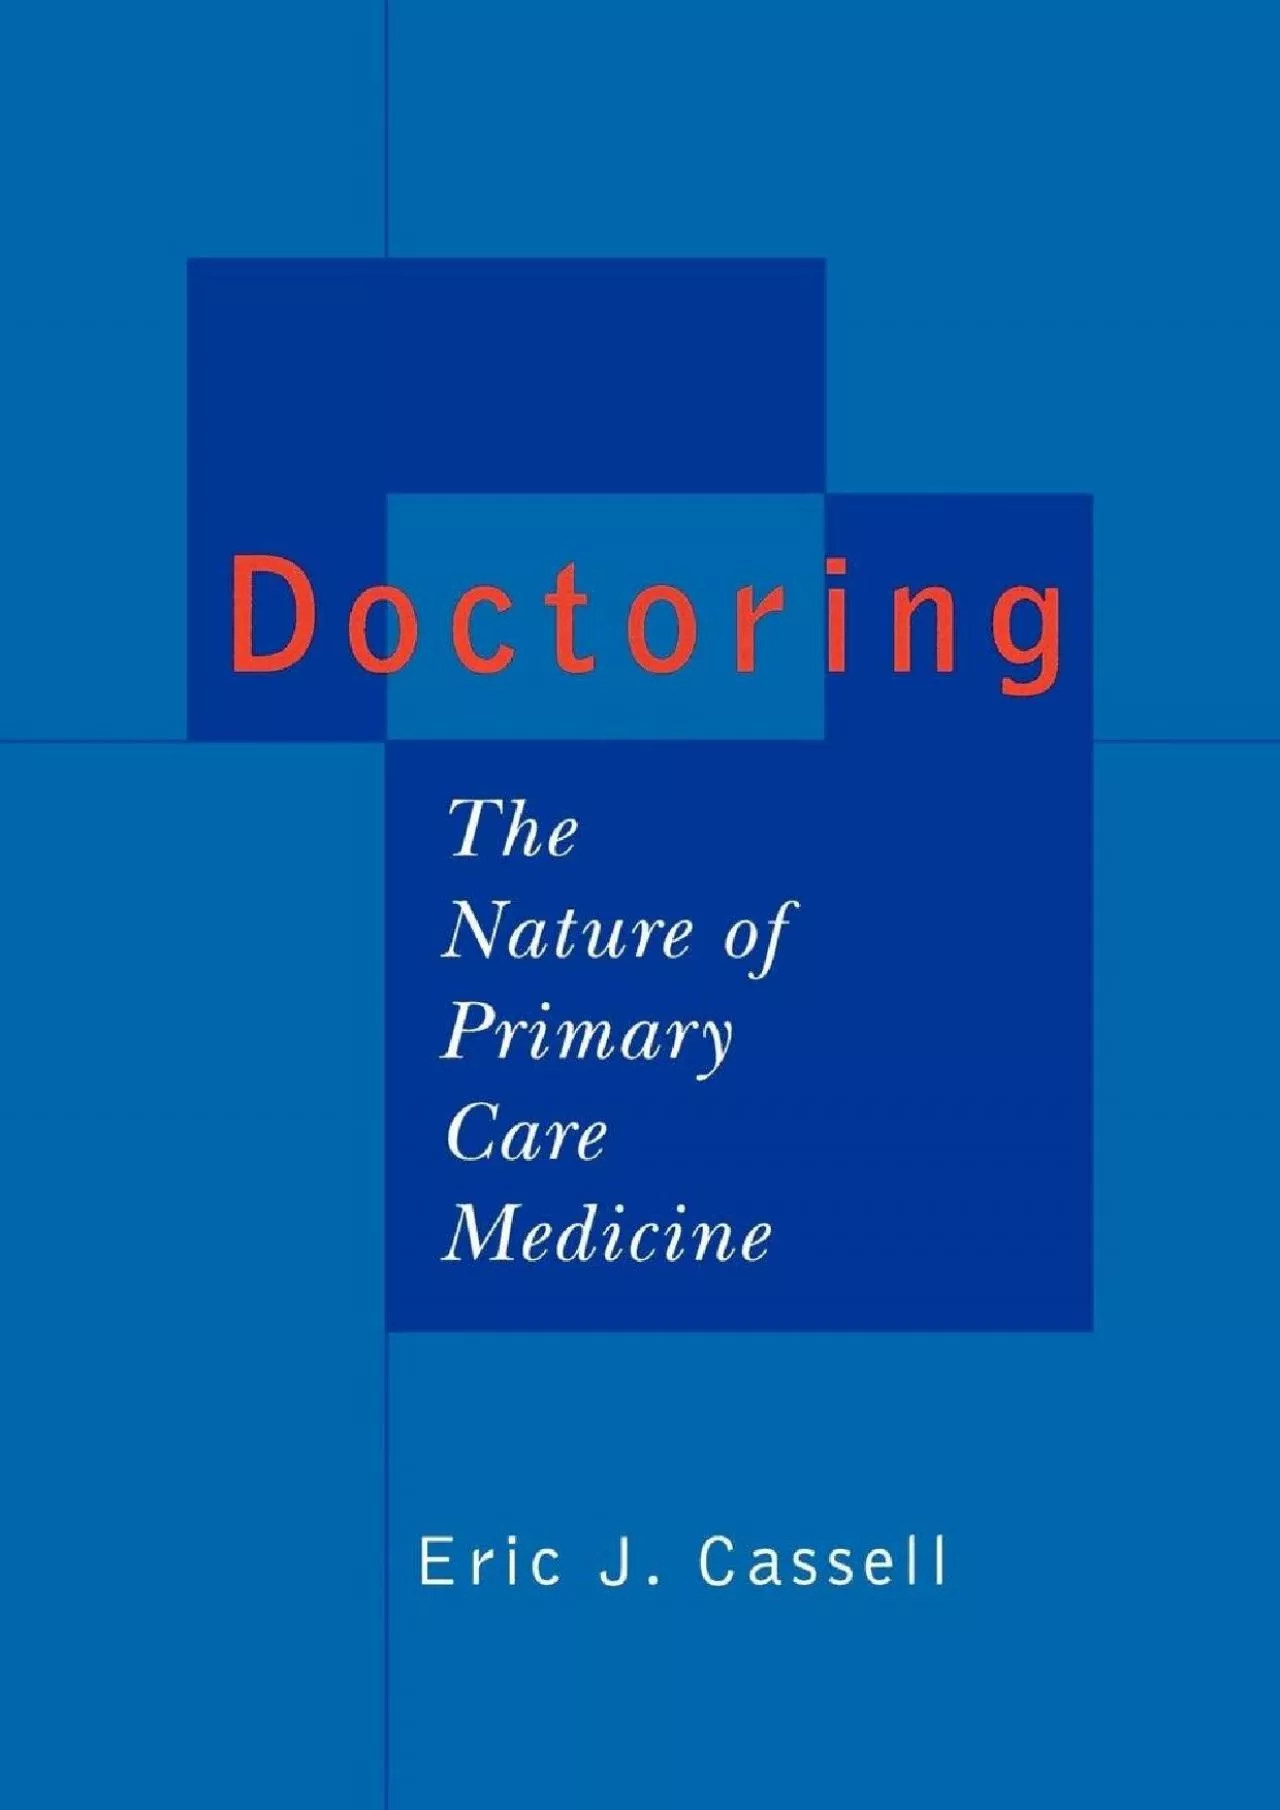 (EBOOK)-Doctoring: The Nature of Primary Care Medicine